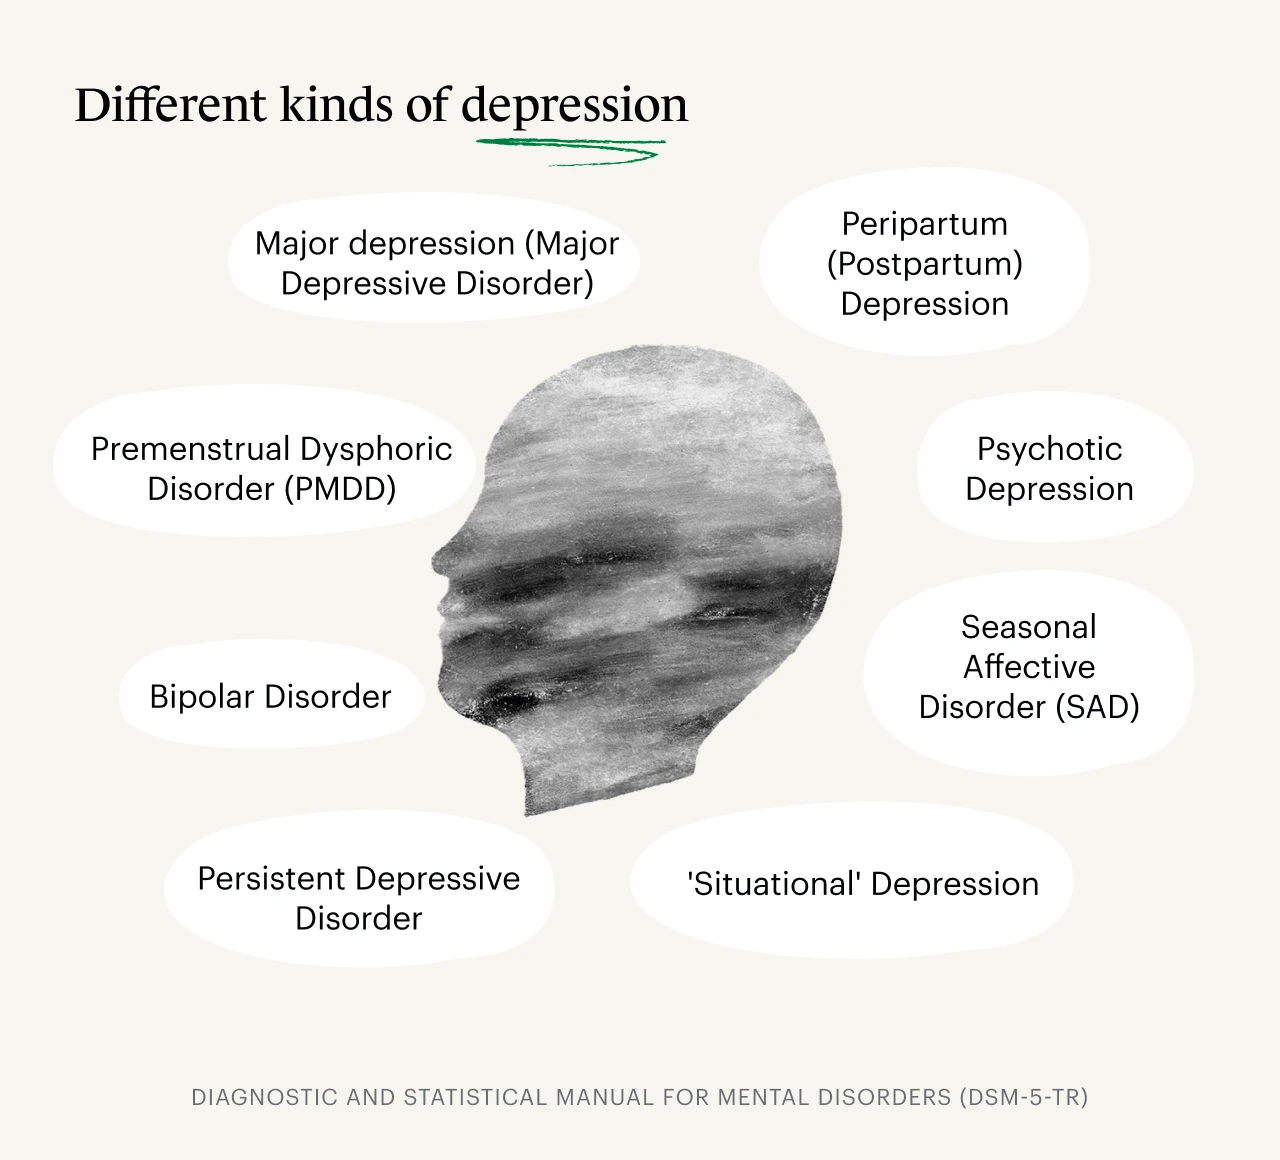 A Monarch original illustration of a silhouette with an infographic on the different kinds of depression provided by the Diagnostic and Statistical Manual for Mental Disorders (DSM-5- TR)